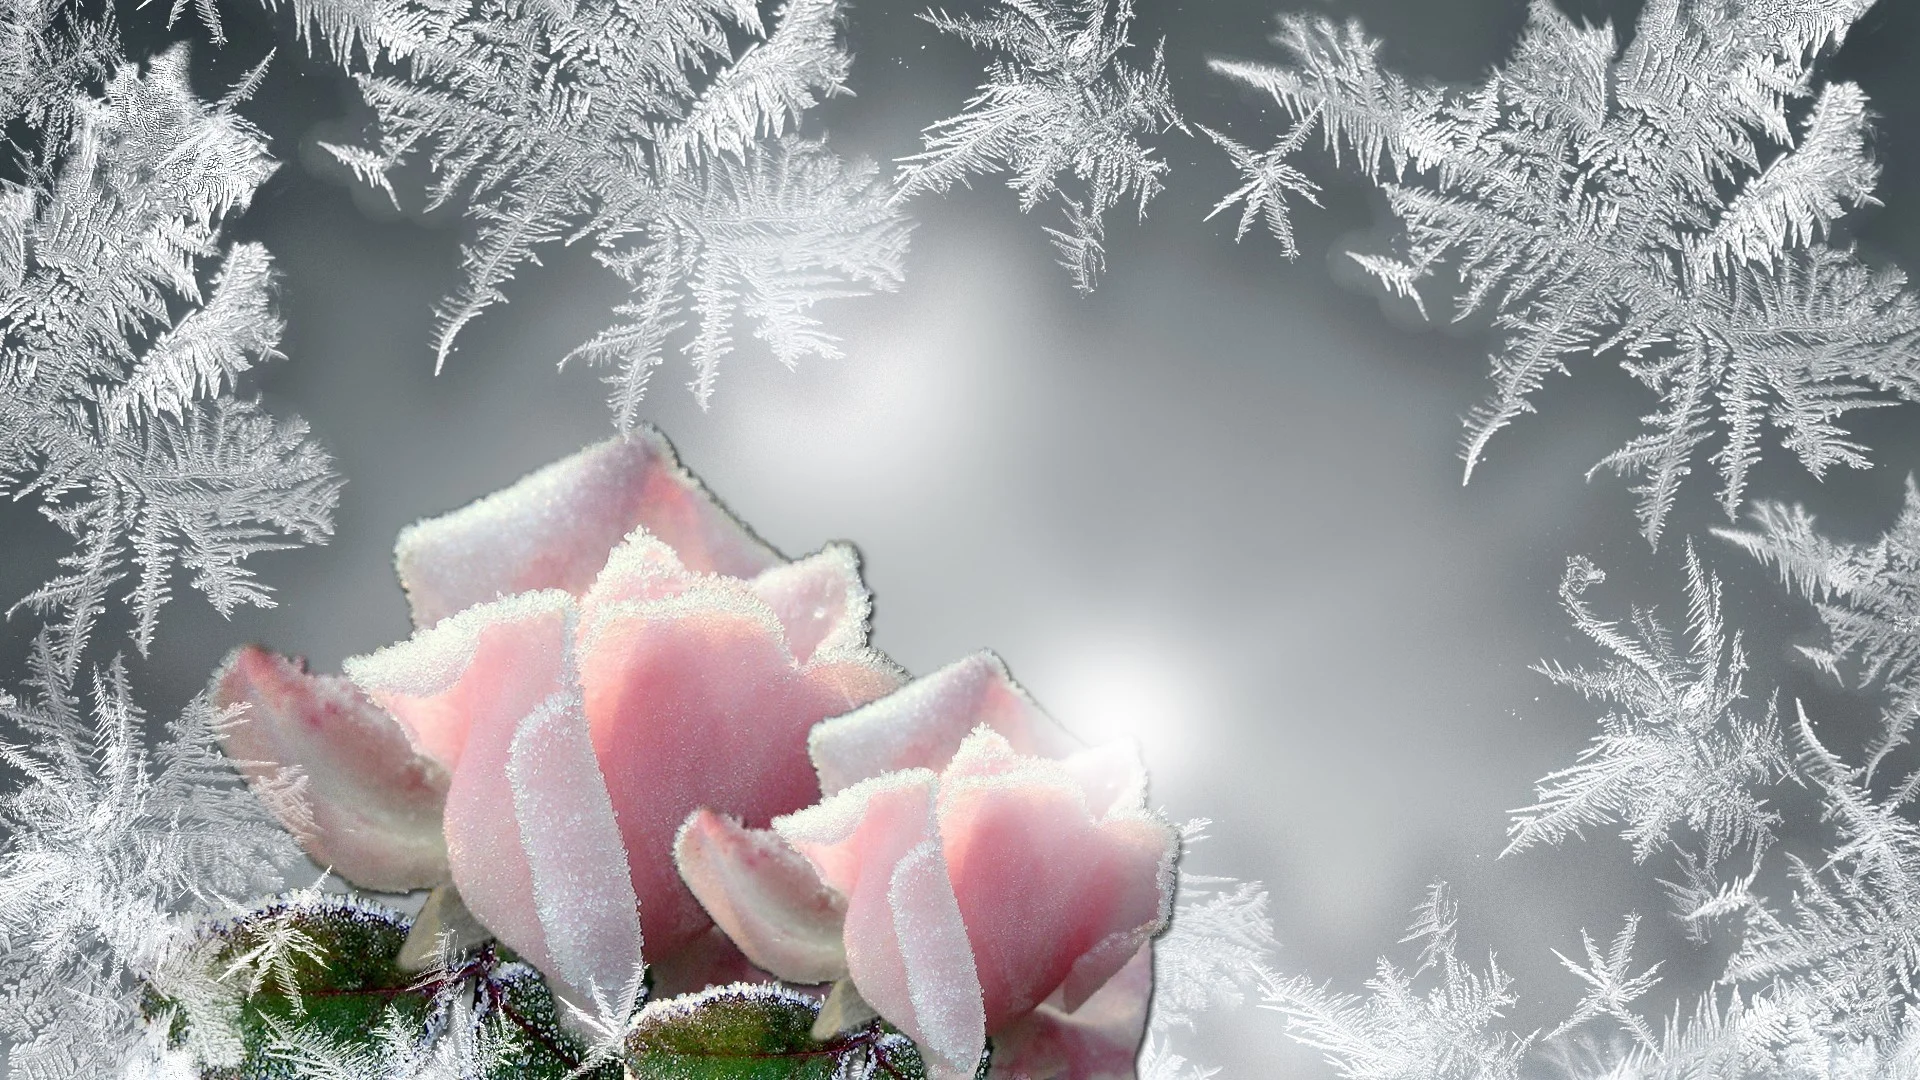 Persona Rose Roses Glow Cold Frozen Frost Bright Firefox Pink Winter Freeze  Silver Flower Wallpaper Backgrounds Hd – 1920×1080